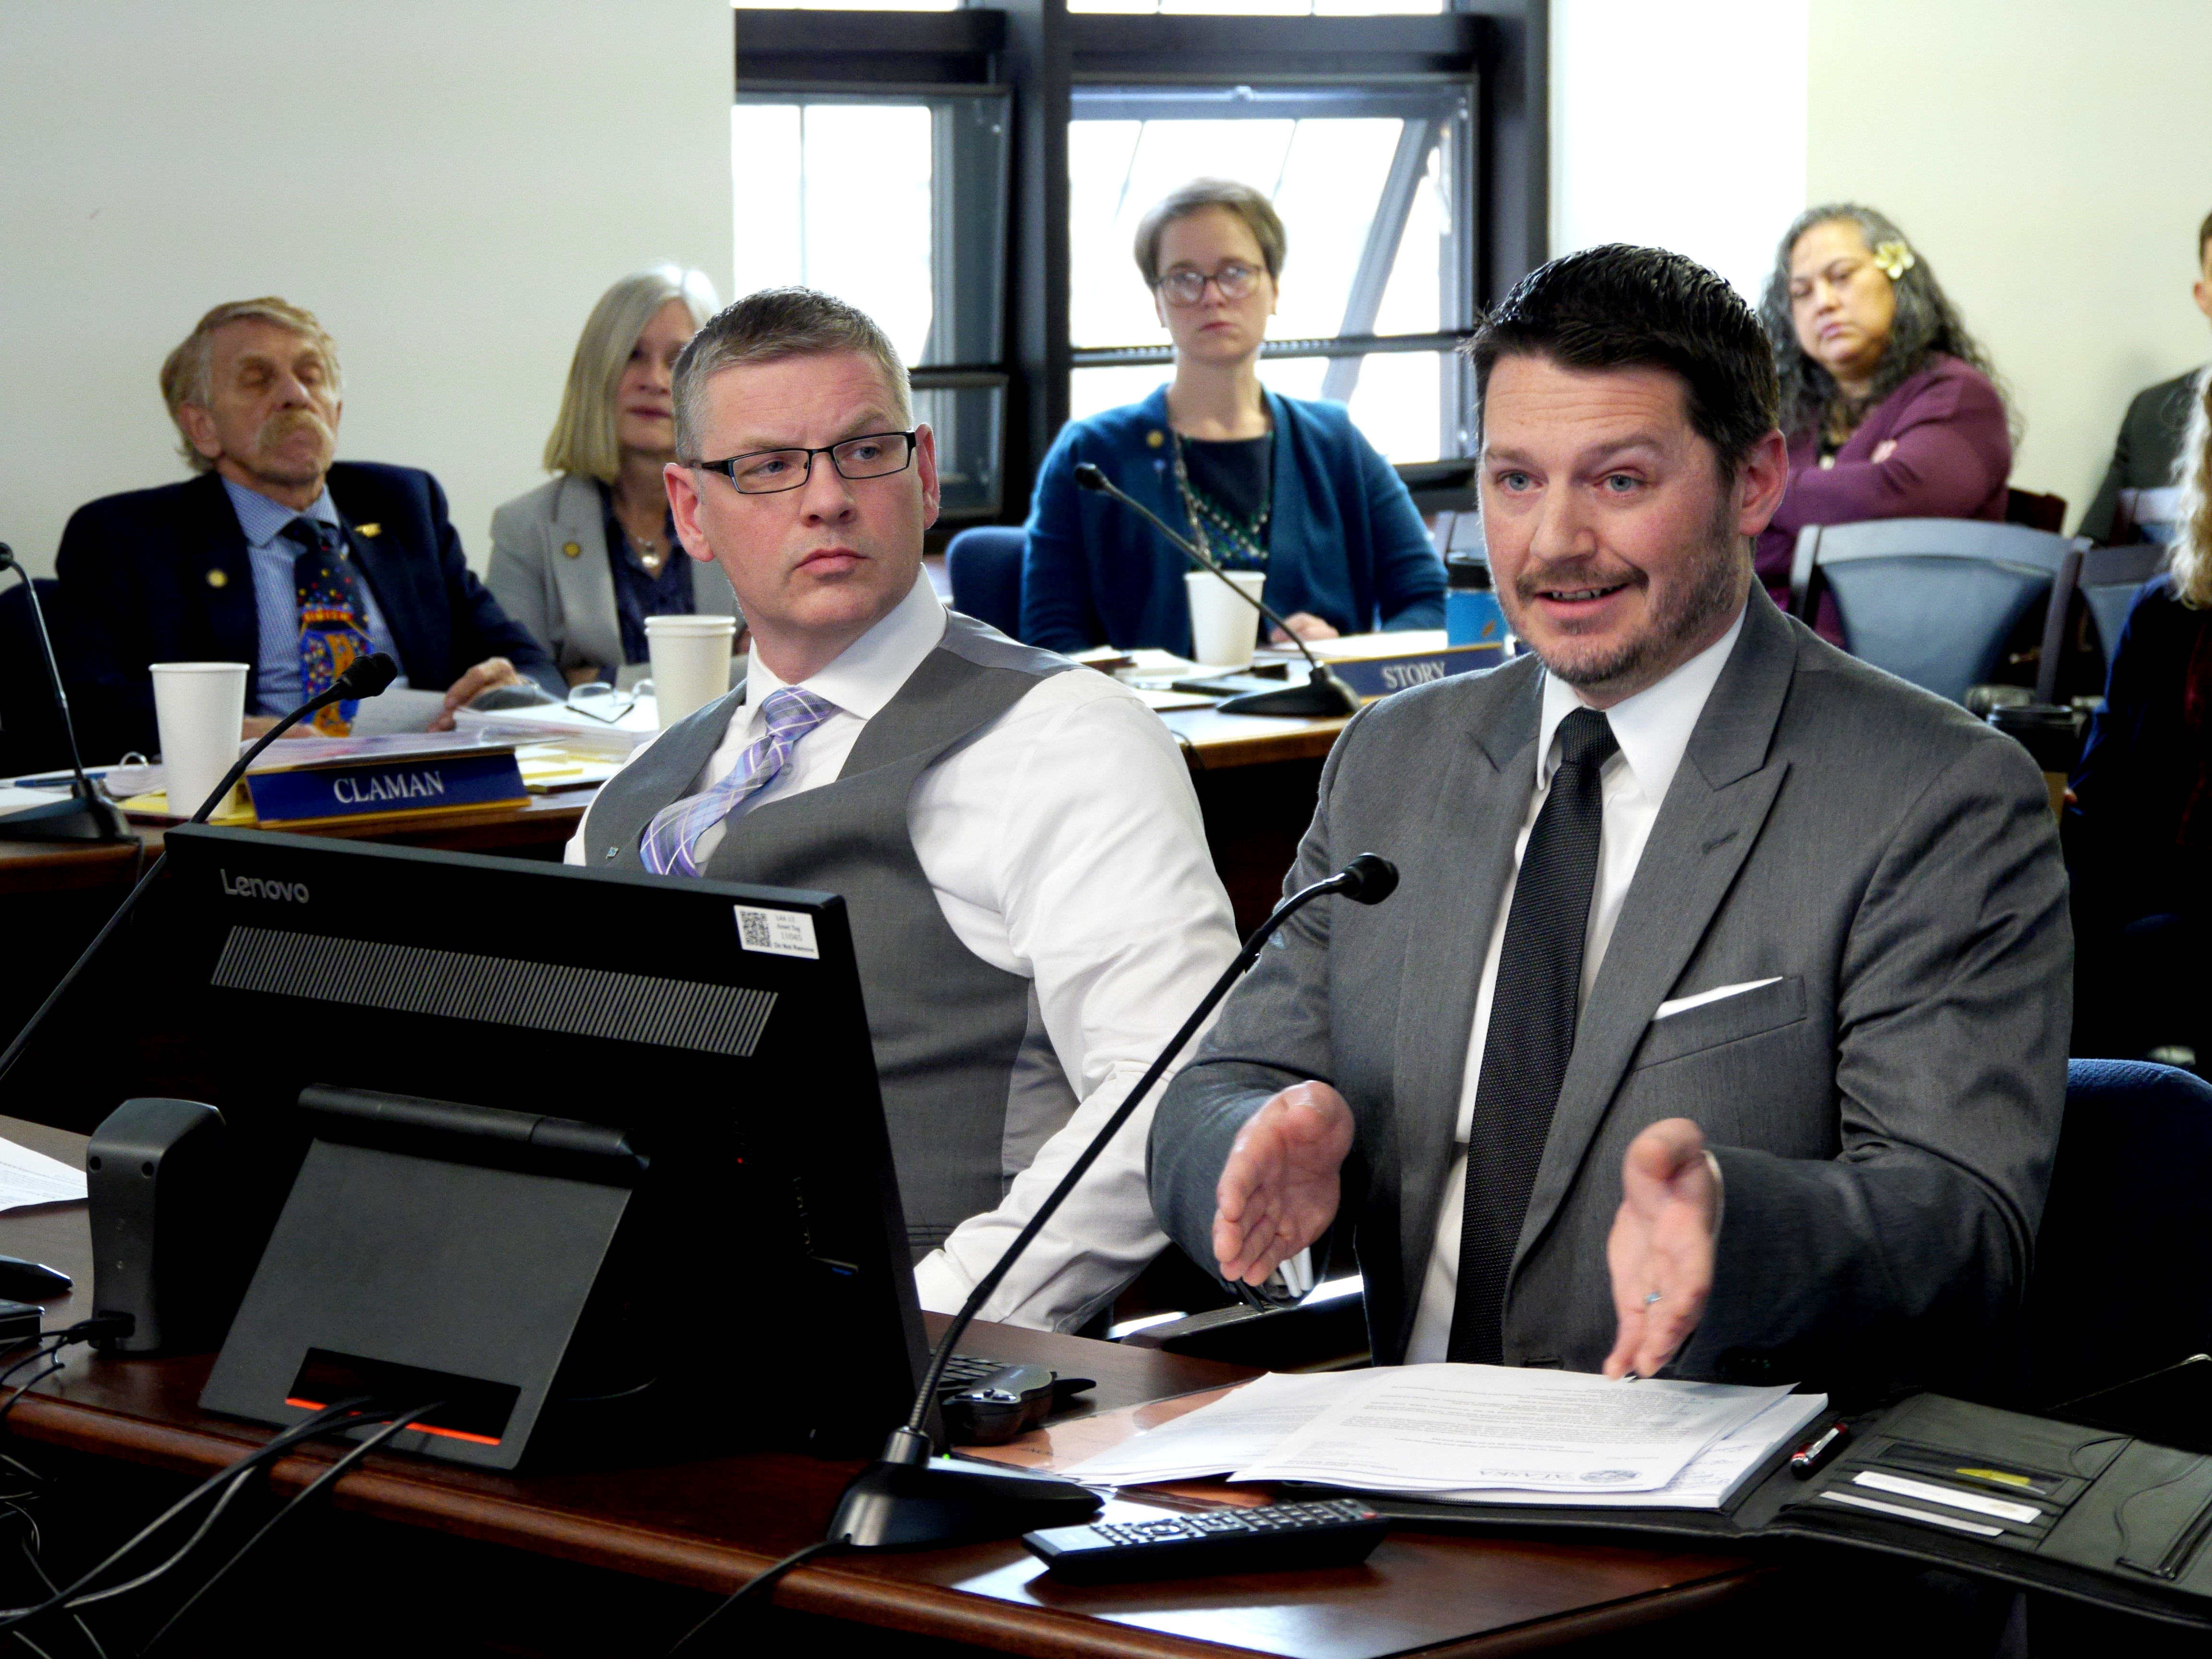 Department of Health and Social Services Deputy Commissioner Albert Wall, left, and Department of Administration Chief Procurement Officer Jason Soza field questions from members of the Health and Social Services and State Affairs committees in Juneau on April 2, 2019. The committees were examining procurement procedures that led to a controversial contract to manage the Alaska Psychiatric Institute.